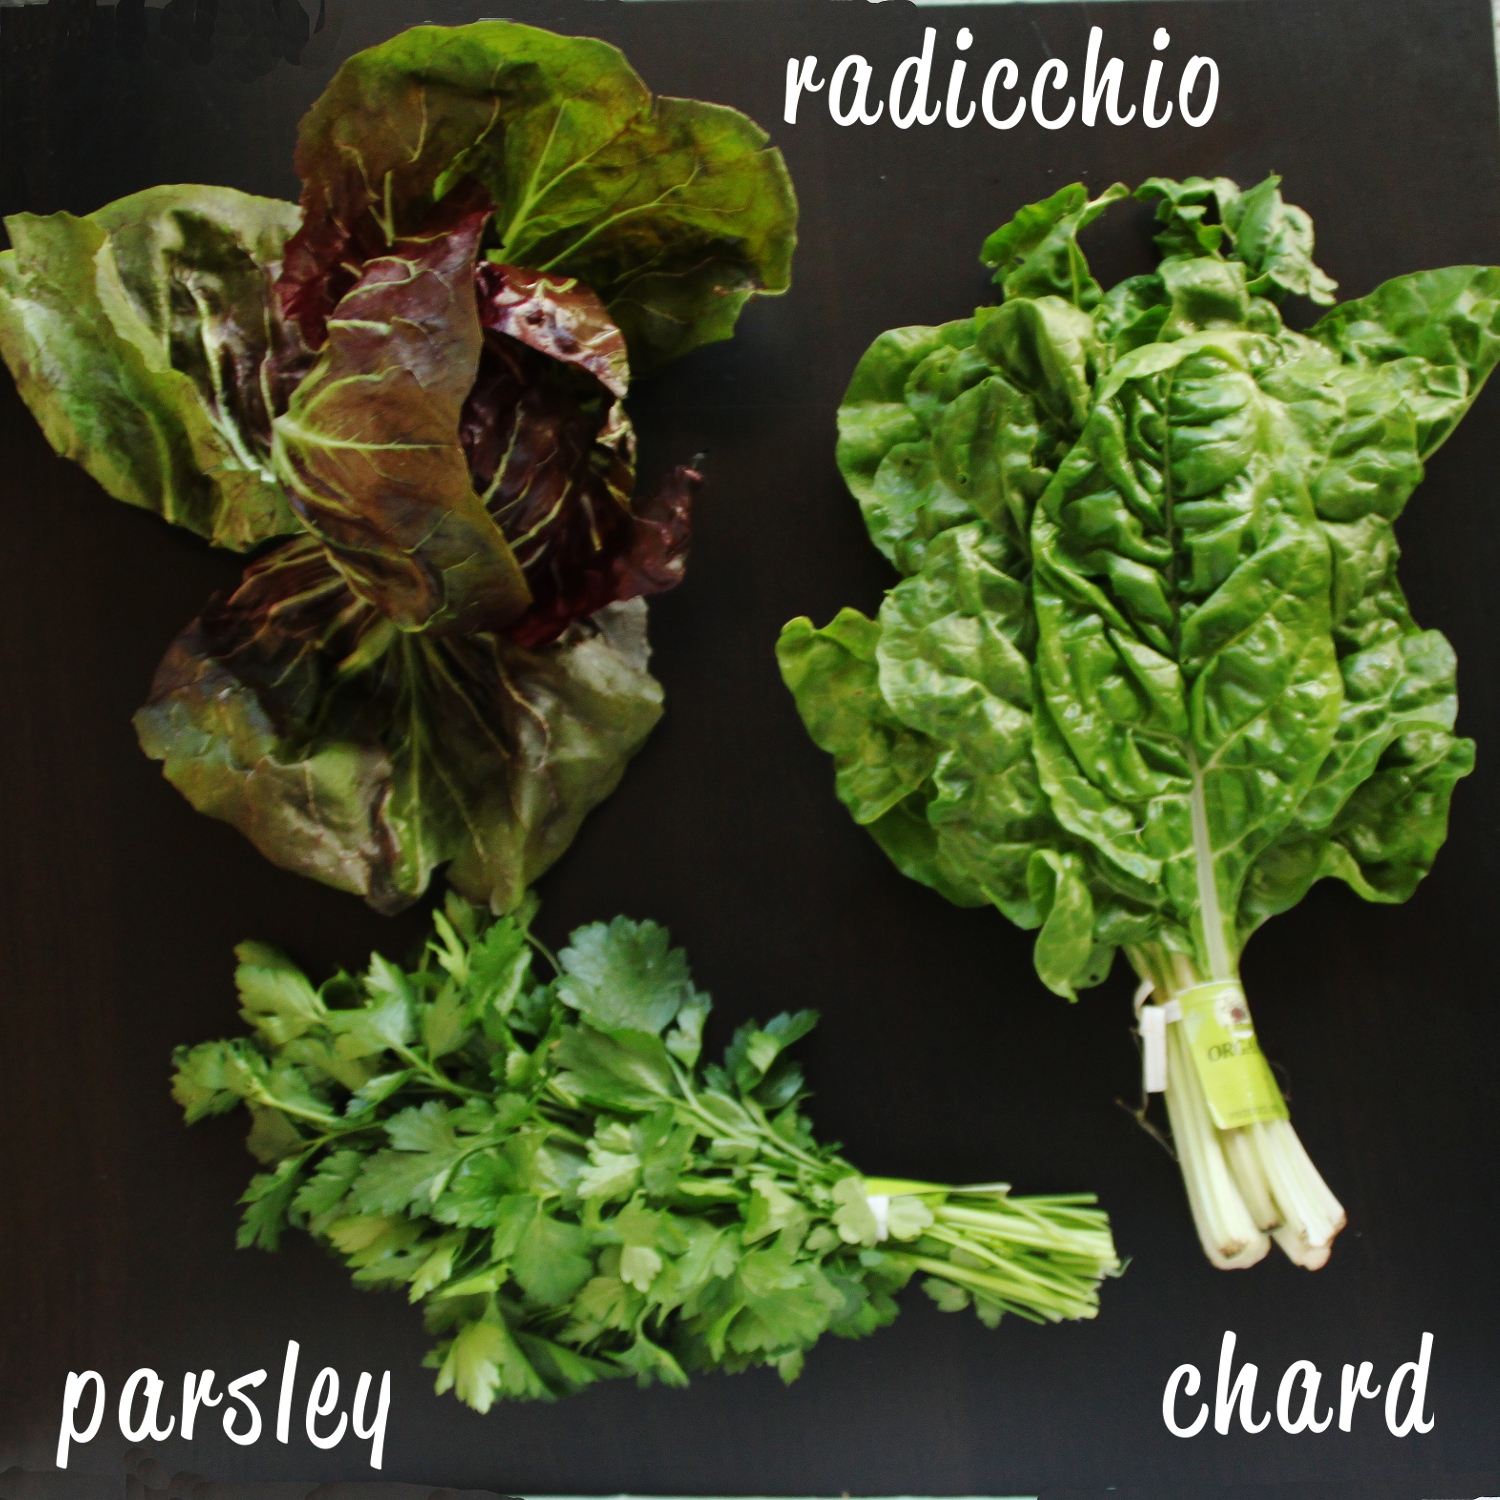 lettuce, radishes and cabbage labeled with the names of the different types of vegetables